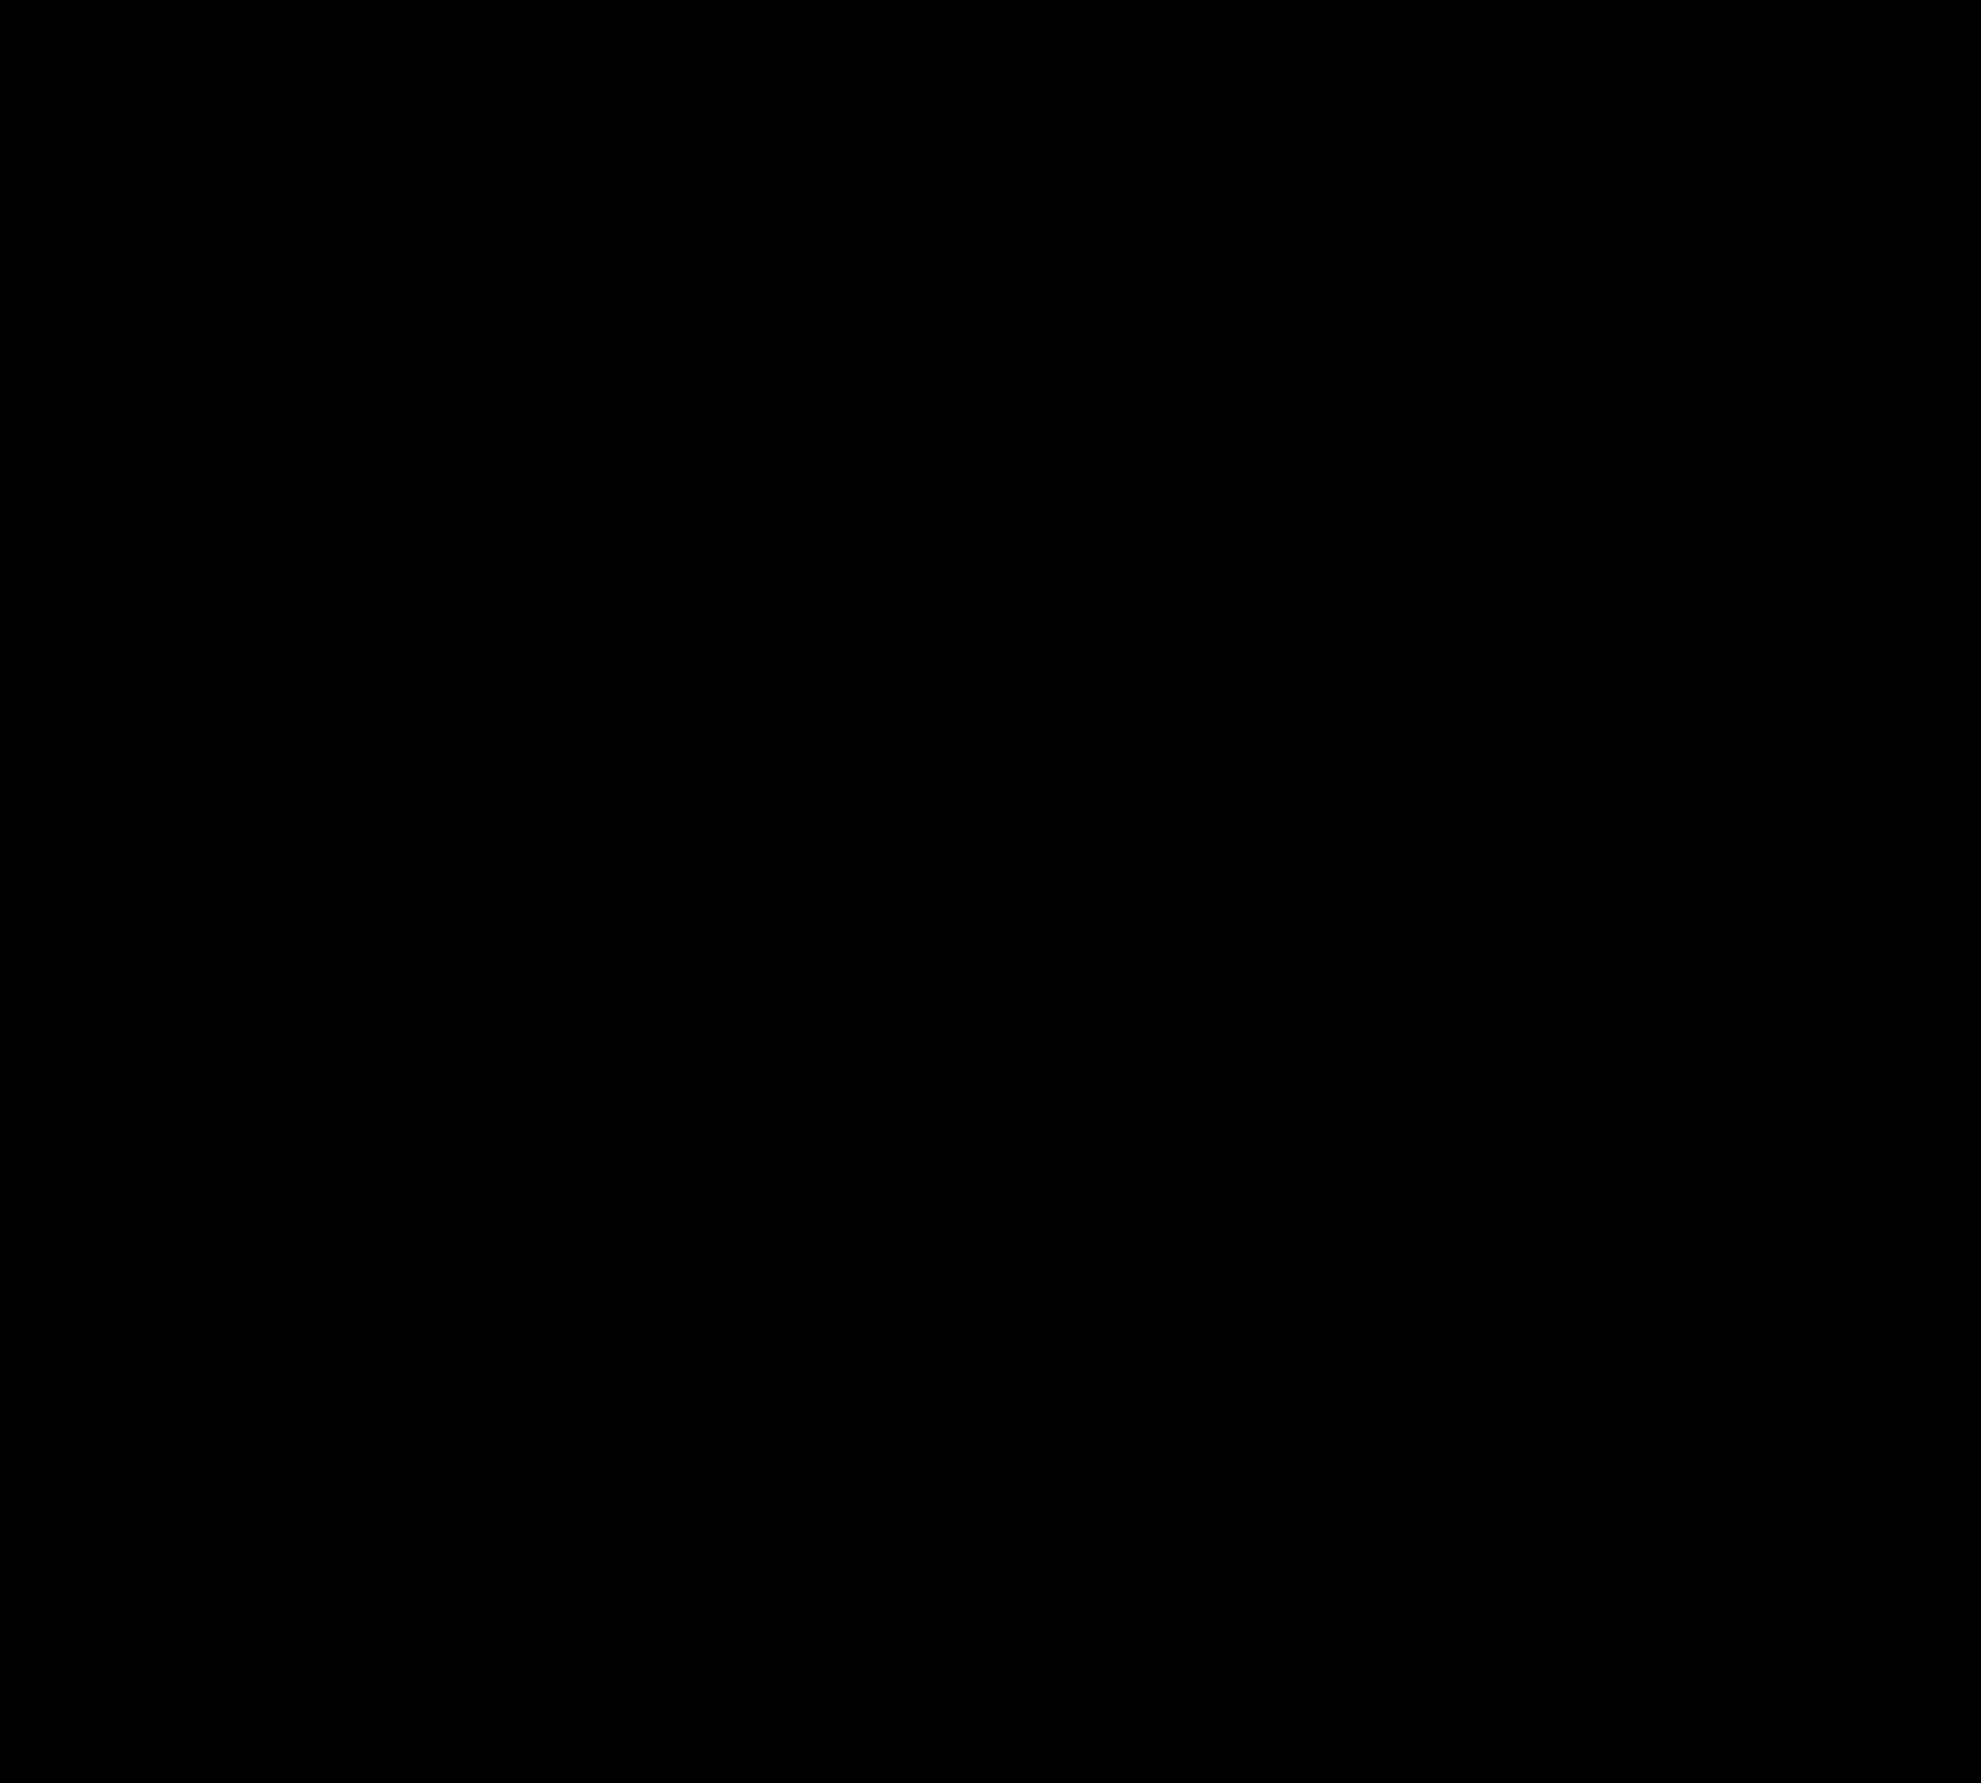 A Black Background With A Black Square